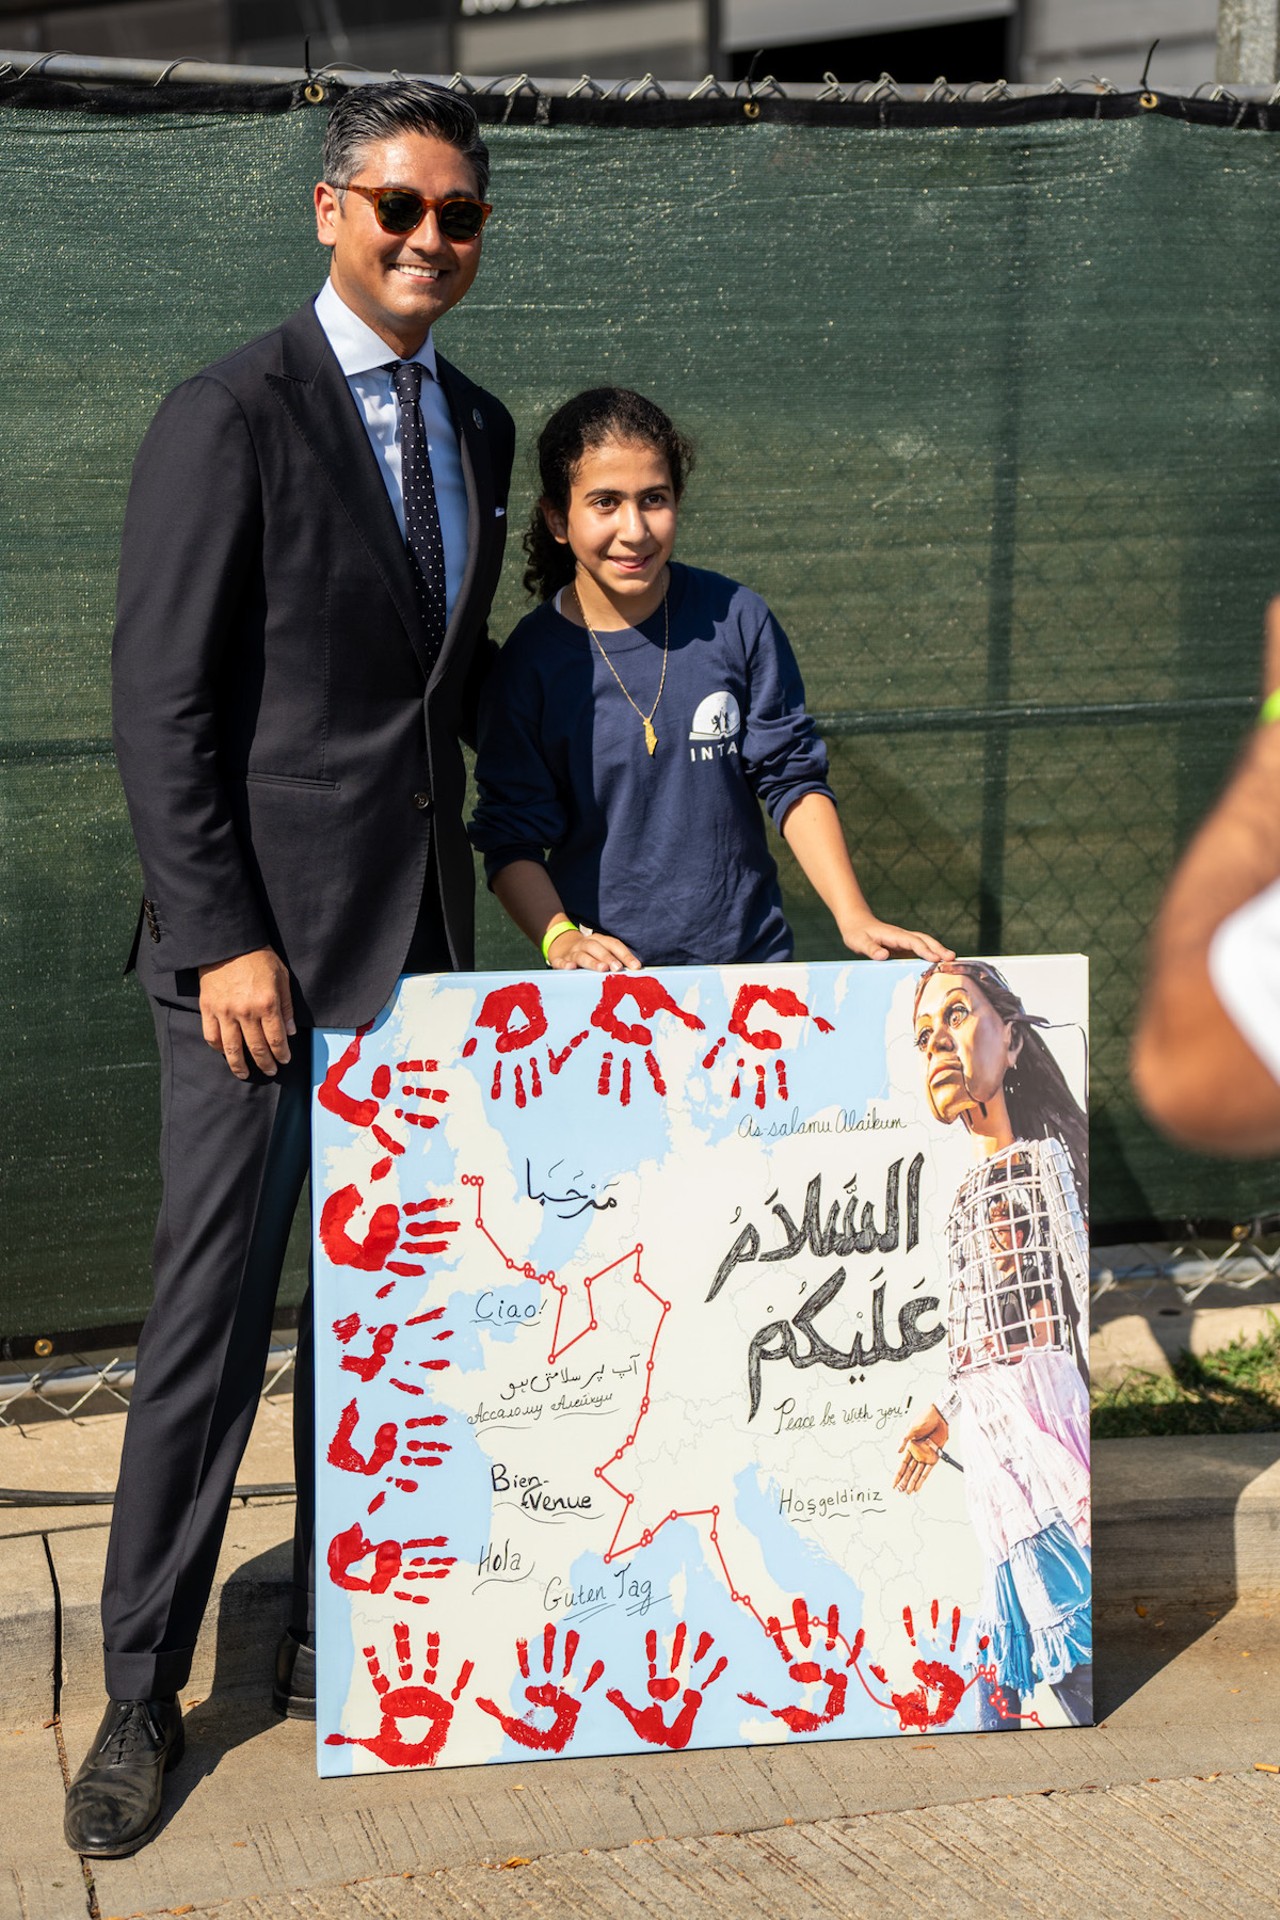 Cincinnati Mayor Aftab Pureval poses with a girl holding a sign during Little Amal's visit to Cincinnati on Sept. 22